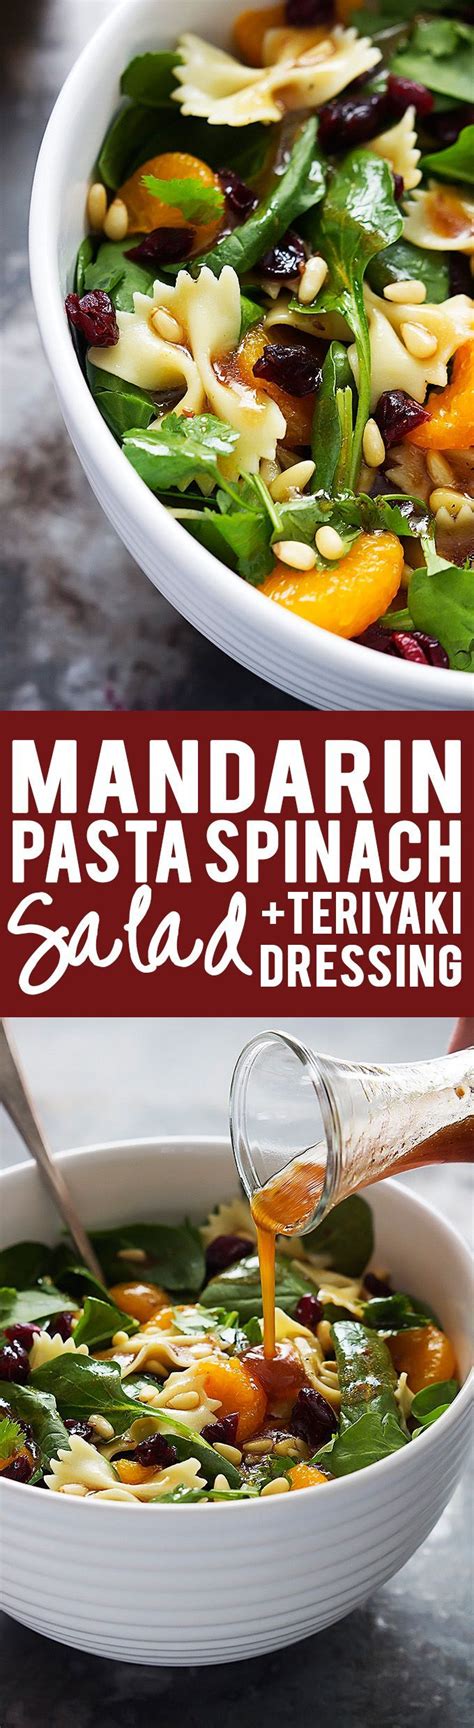 Before serving drizzle desired amount of dressing over salad and toss to coat. Mandarin Pasta Spinach Salad with Teriyaki Dressing (With ...